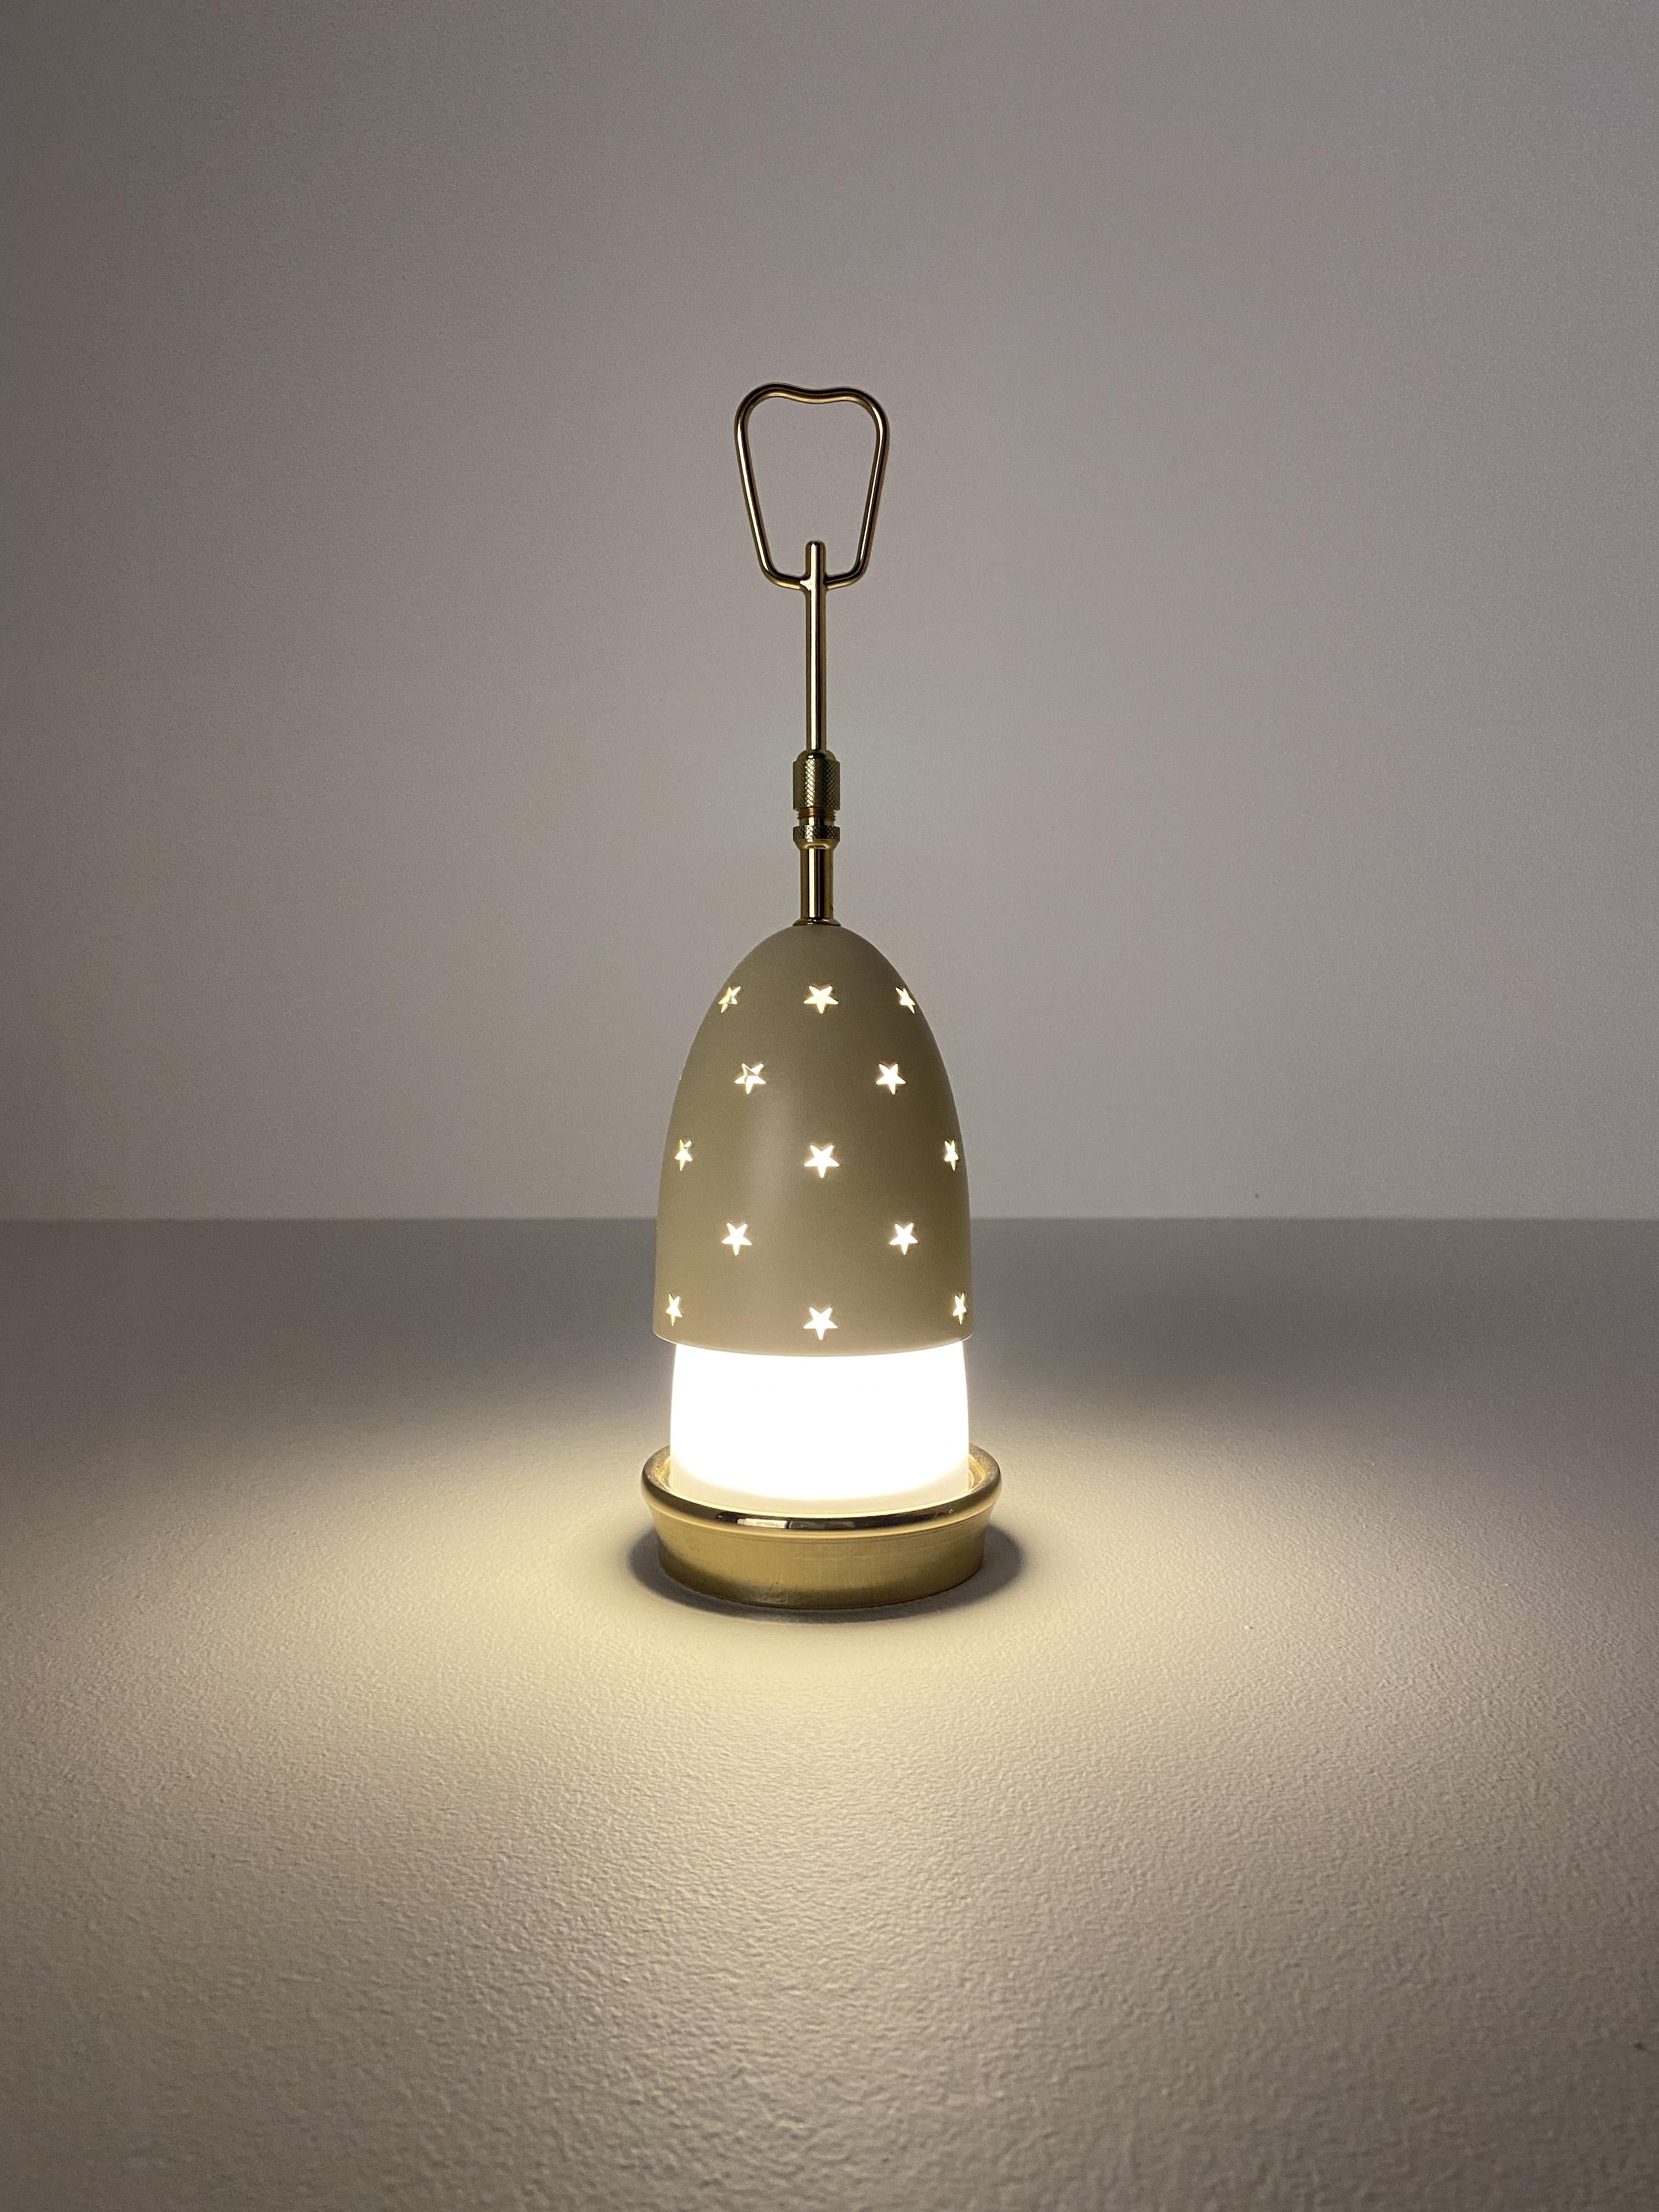 Contemporary 21st Century White Stellina Table Lamp Angelo Lelii 2019 Style of 1950s Italy